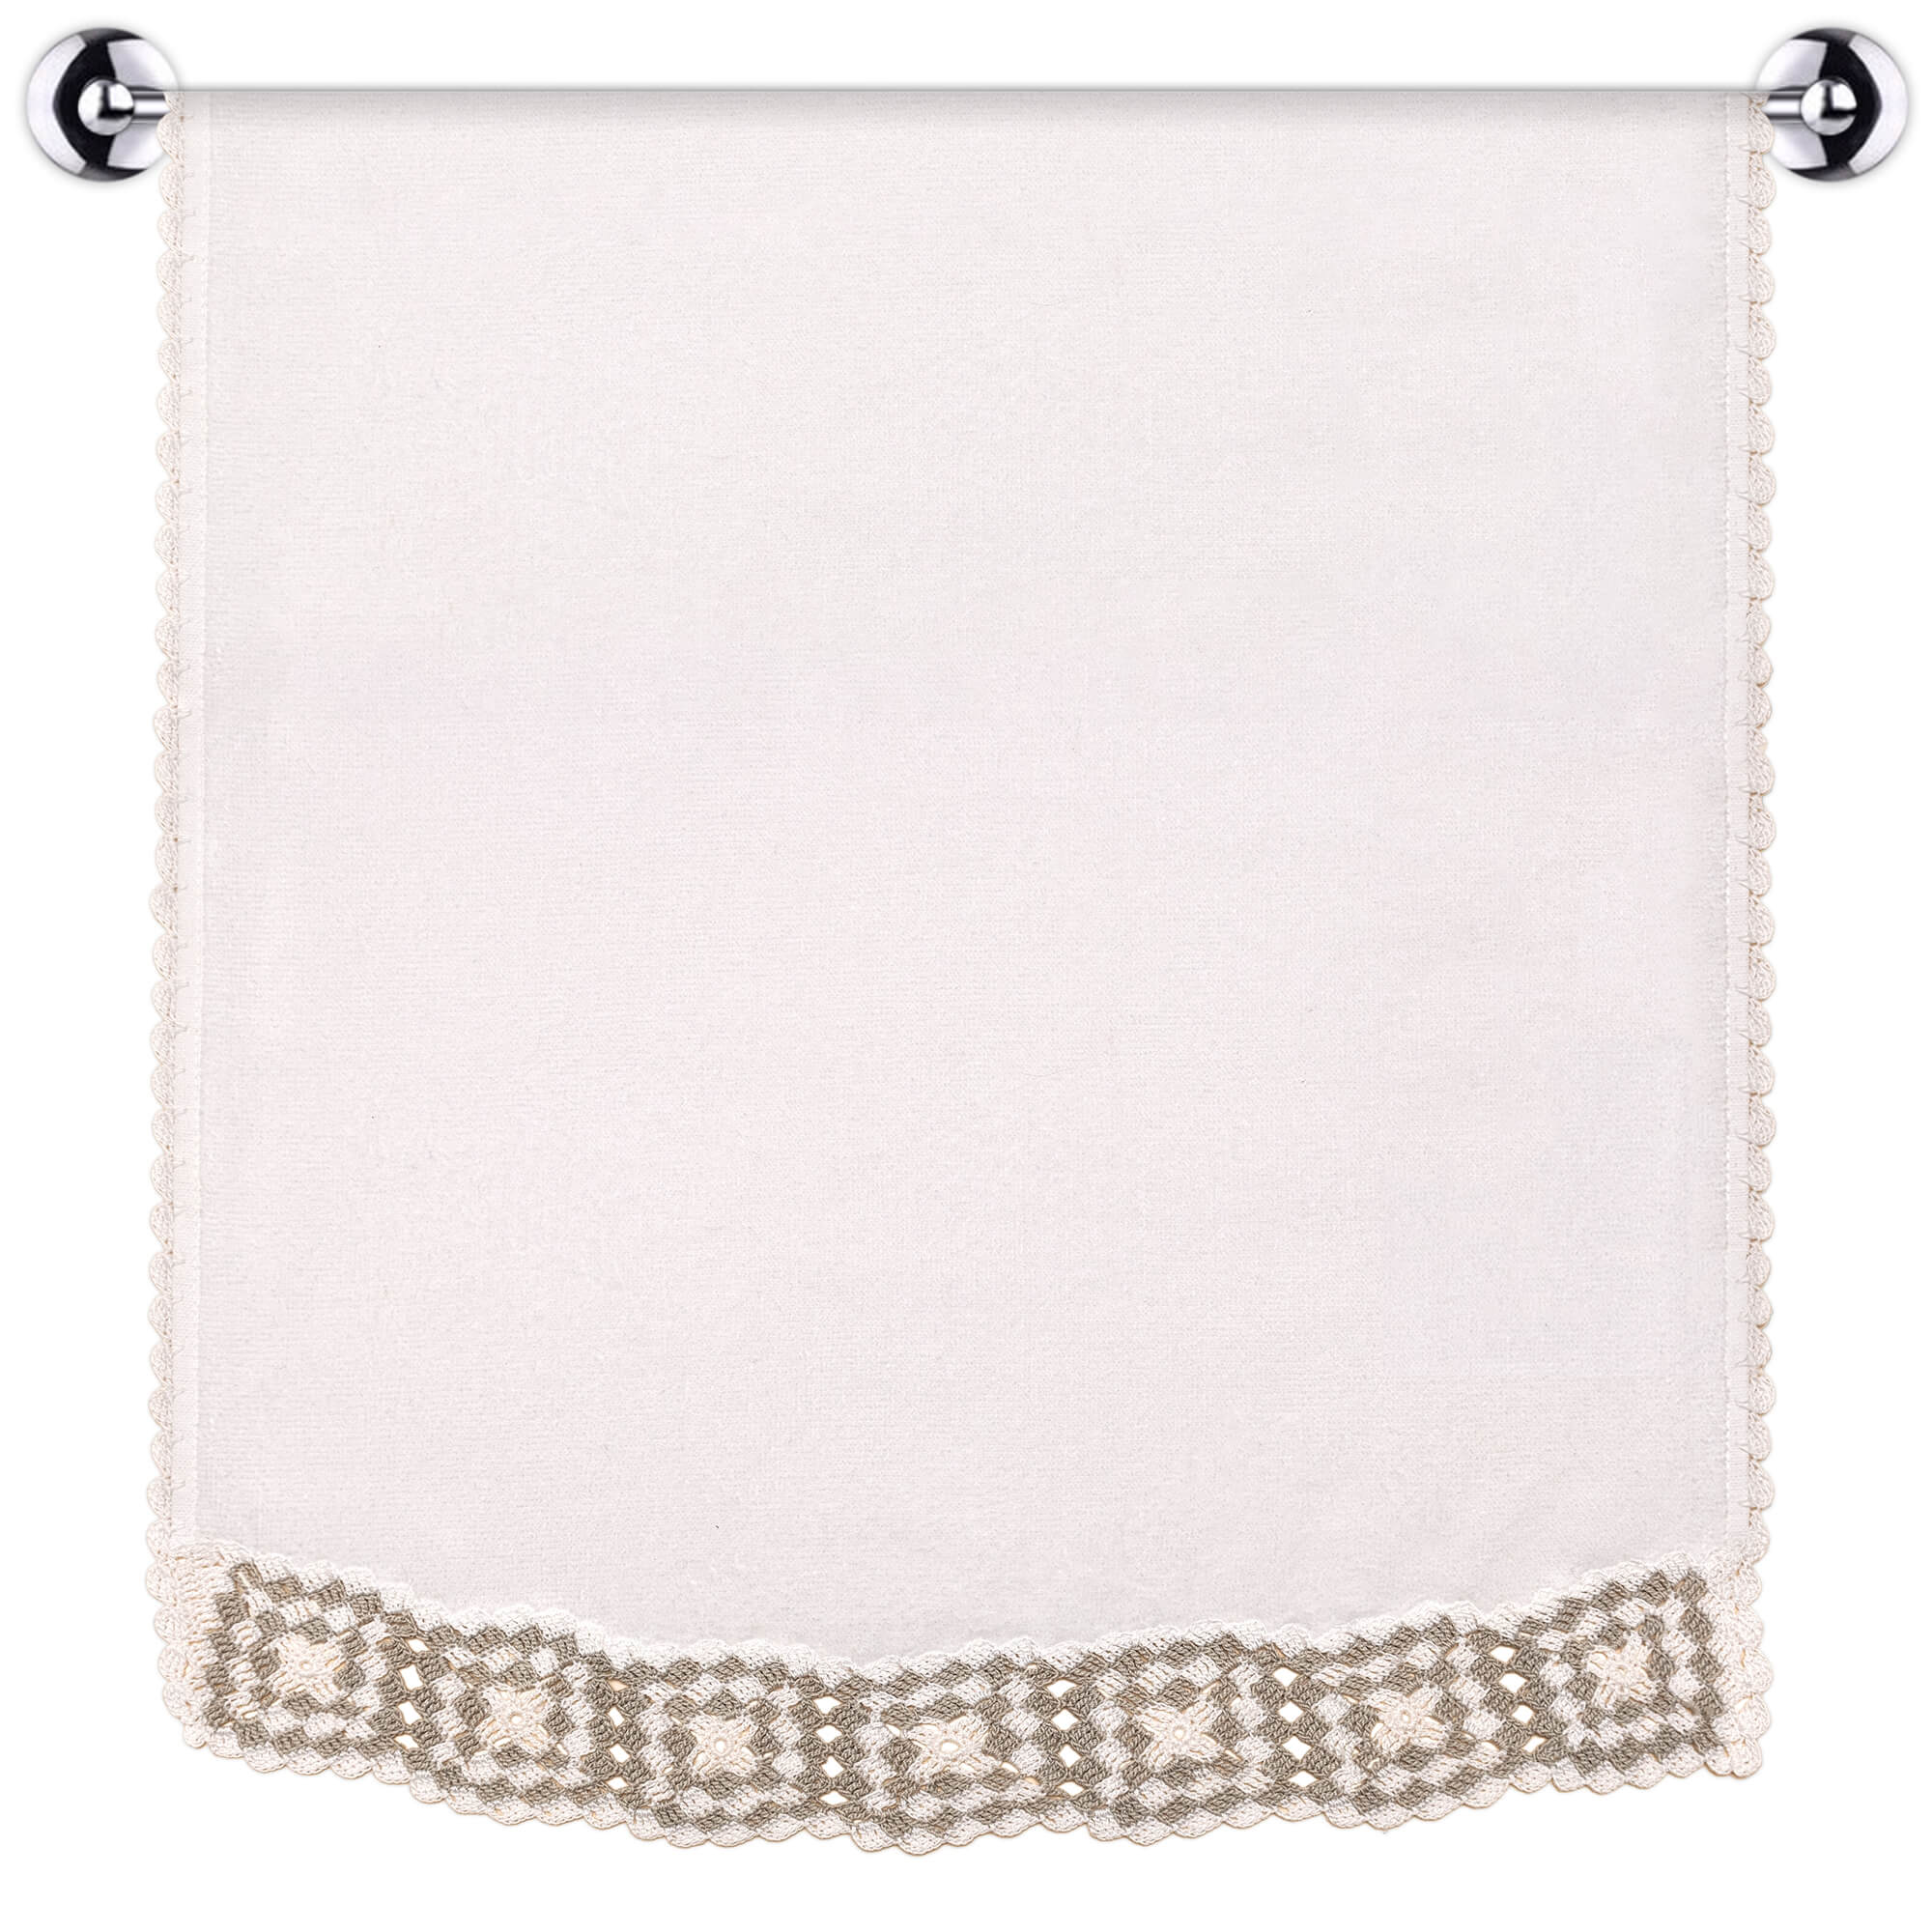 Hand Towel With Checkered Motif Crochet and Edge Work - Valery